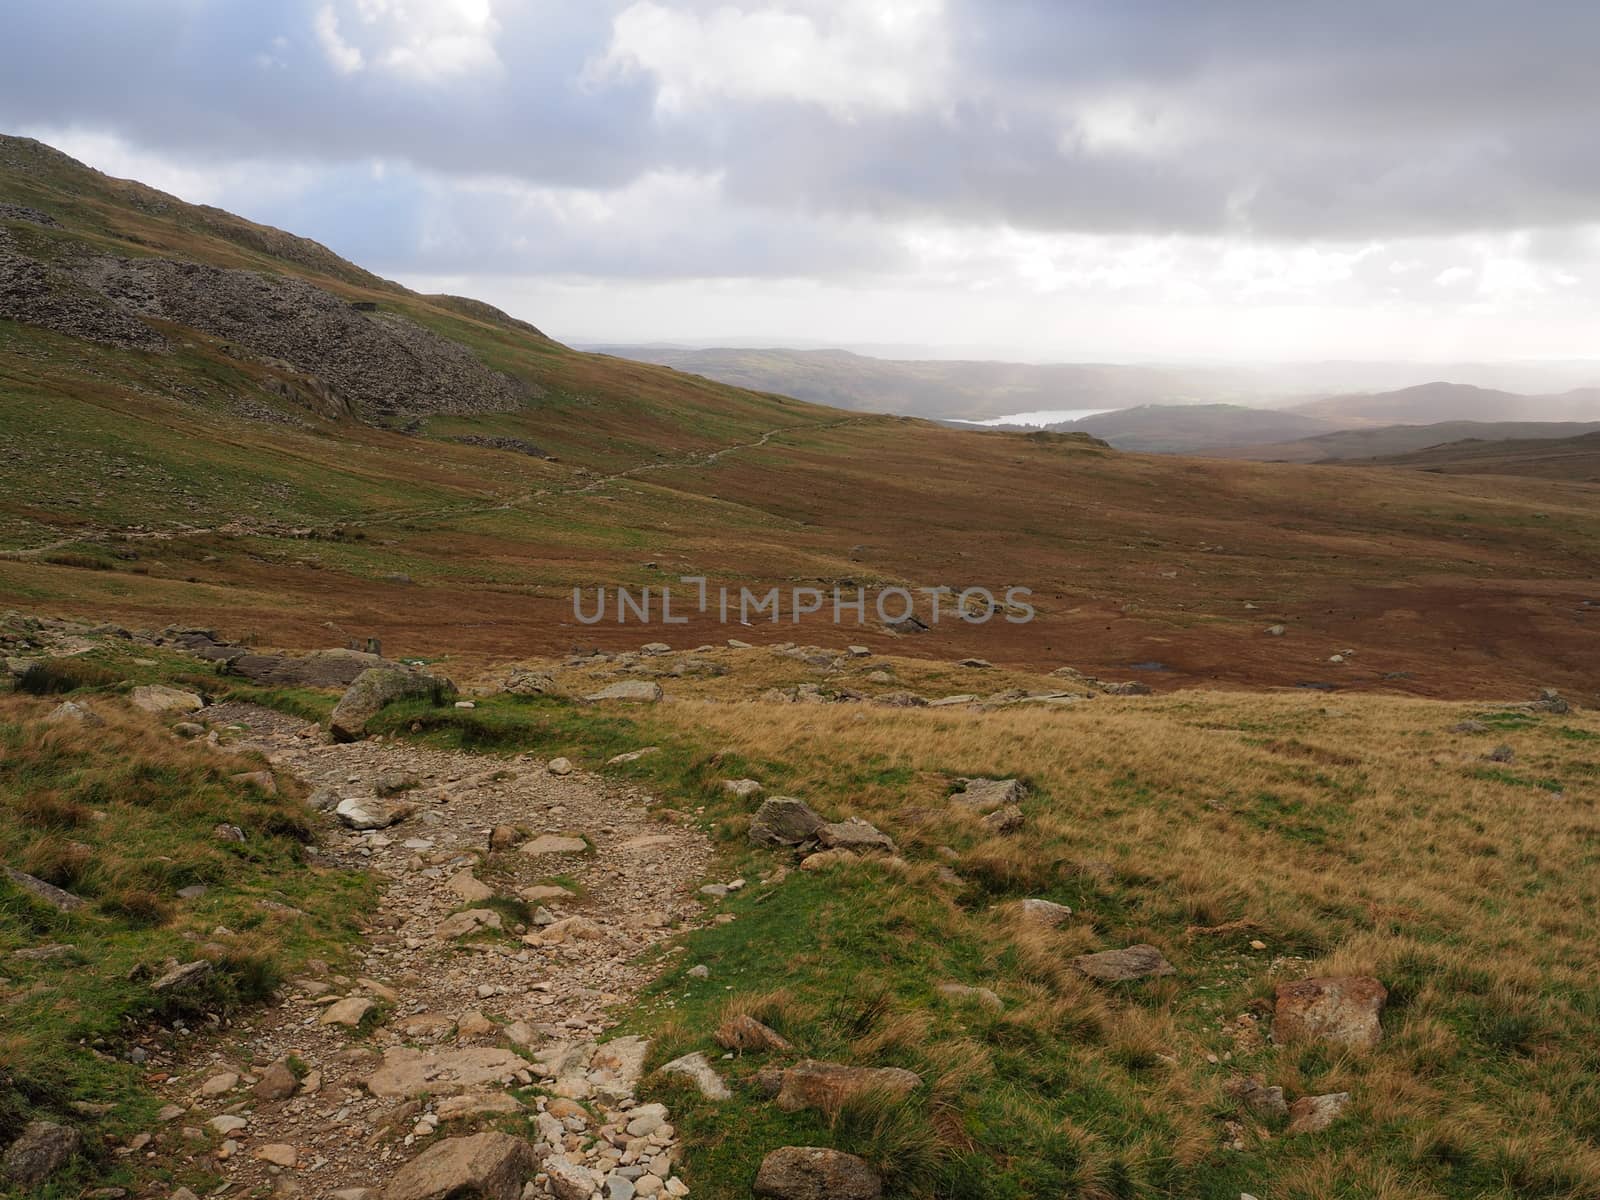 Winding path over mountains with Coniston Water in distance, Lake District by PhilHarland